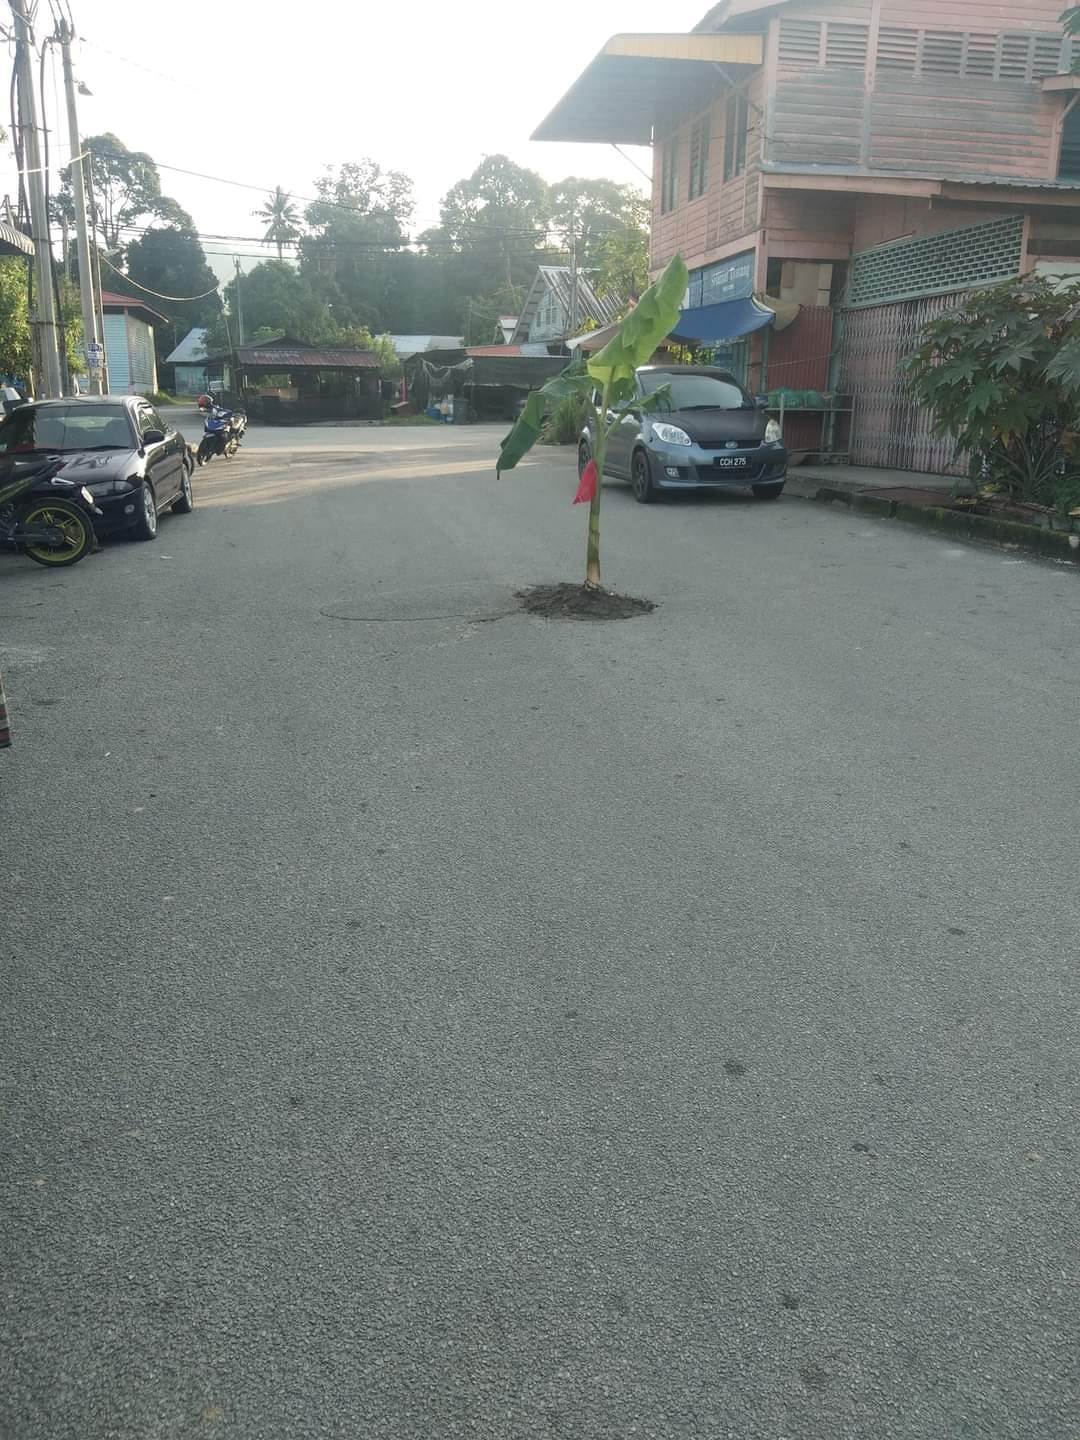 The banana trees planted in potholes.